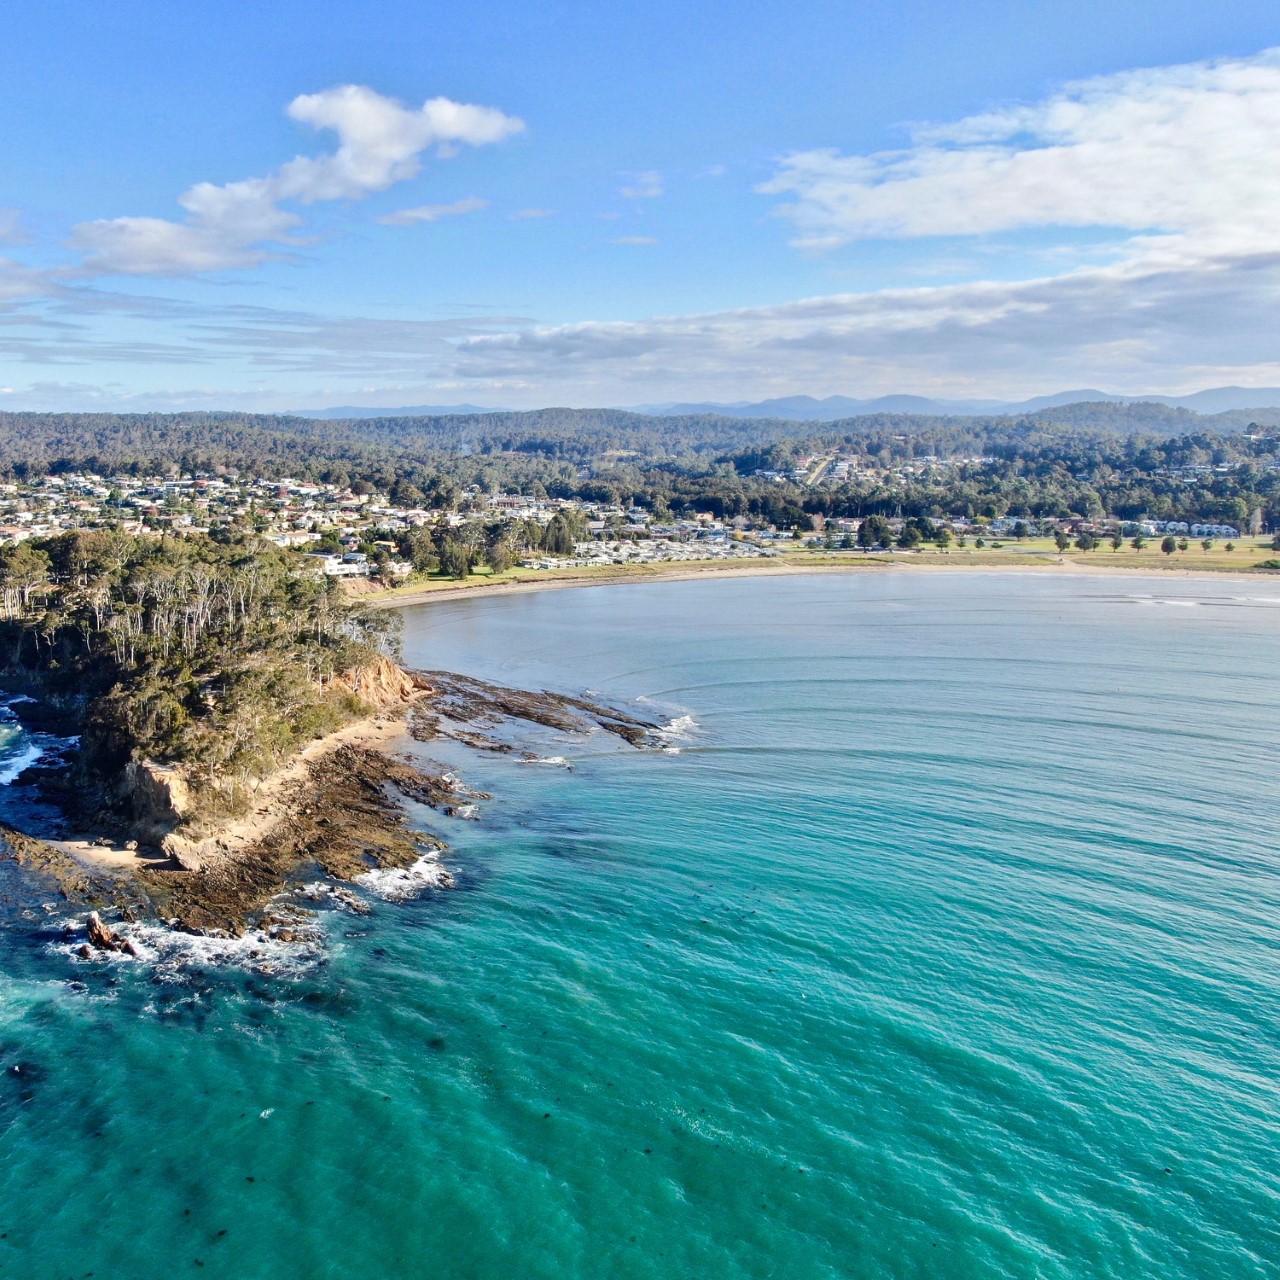 Have your say on the management of the Eurobodalla coastline